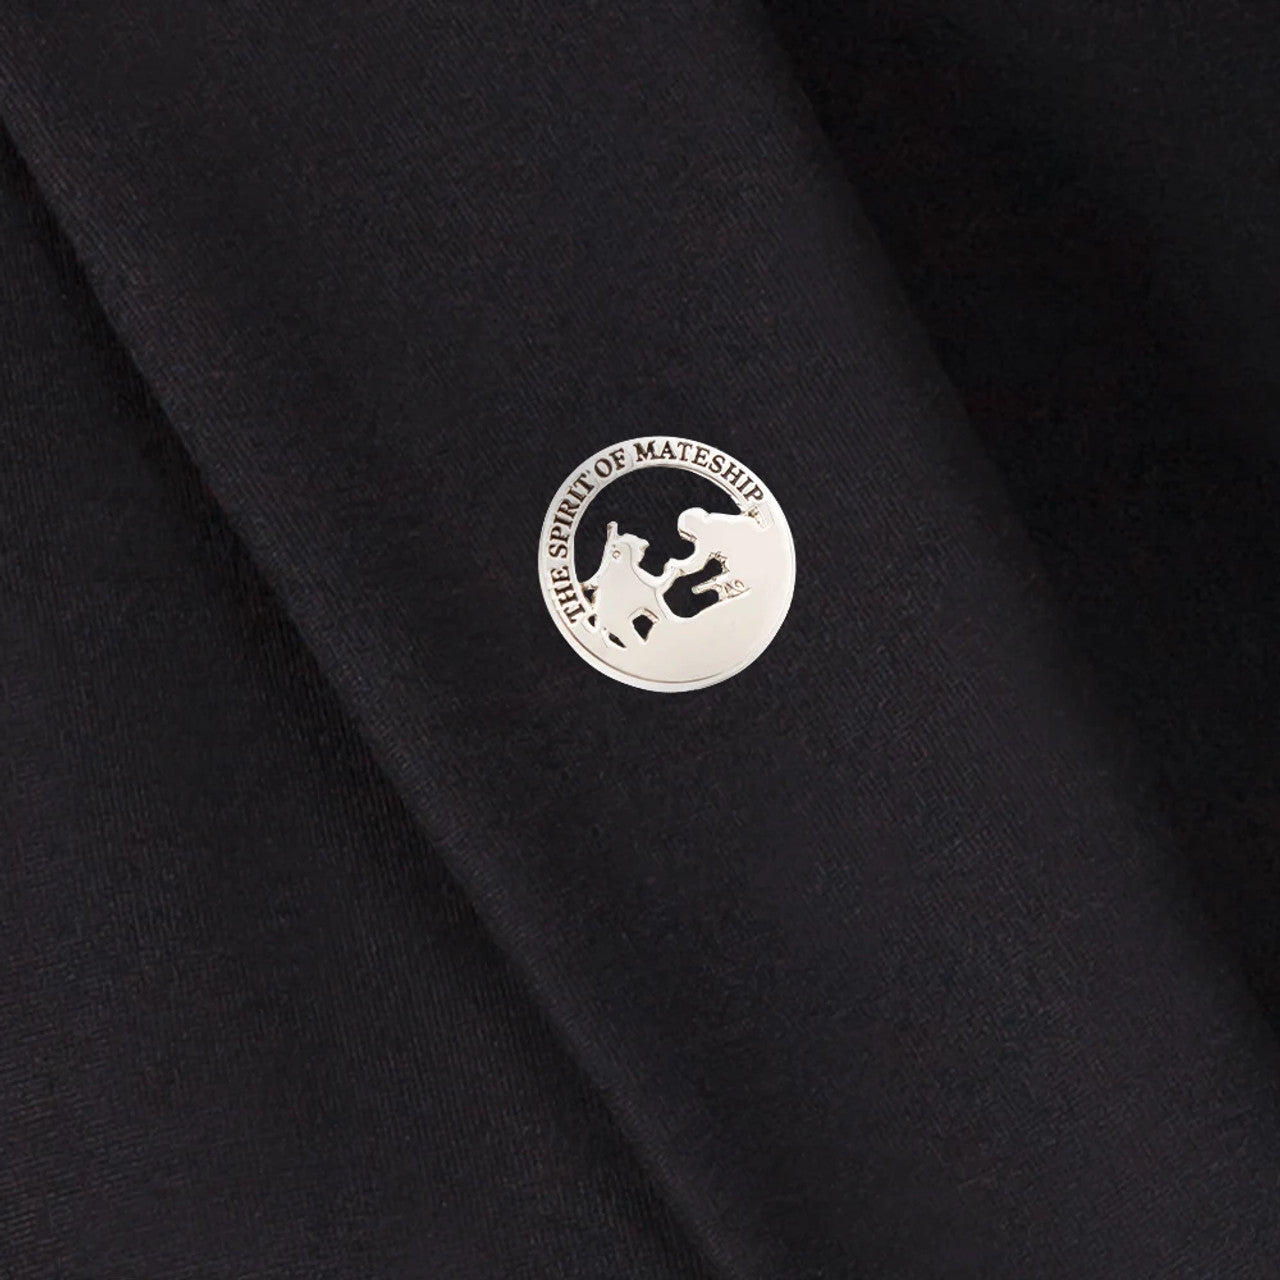 The "Spirit of Mateship Limited Edition Lapel Pin" is a powerful symbol of unity, resilience, and the enduring spirit that defines Australian mateship. This exquisite lapel pin is not just a statement piece; it's a collector's item that encapsulates the essence of camaraderie. www.defenceqstore.com.au